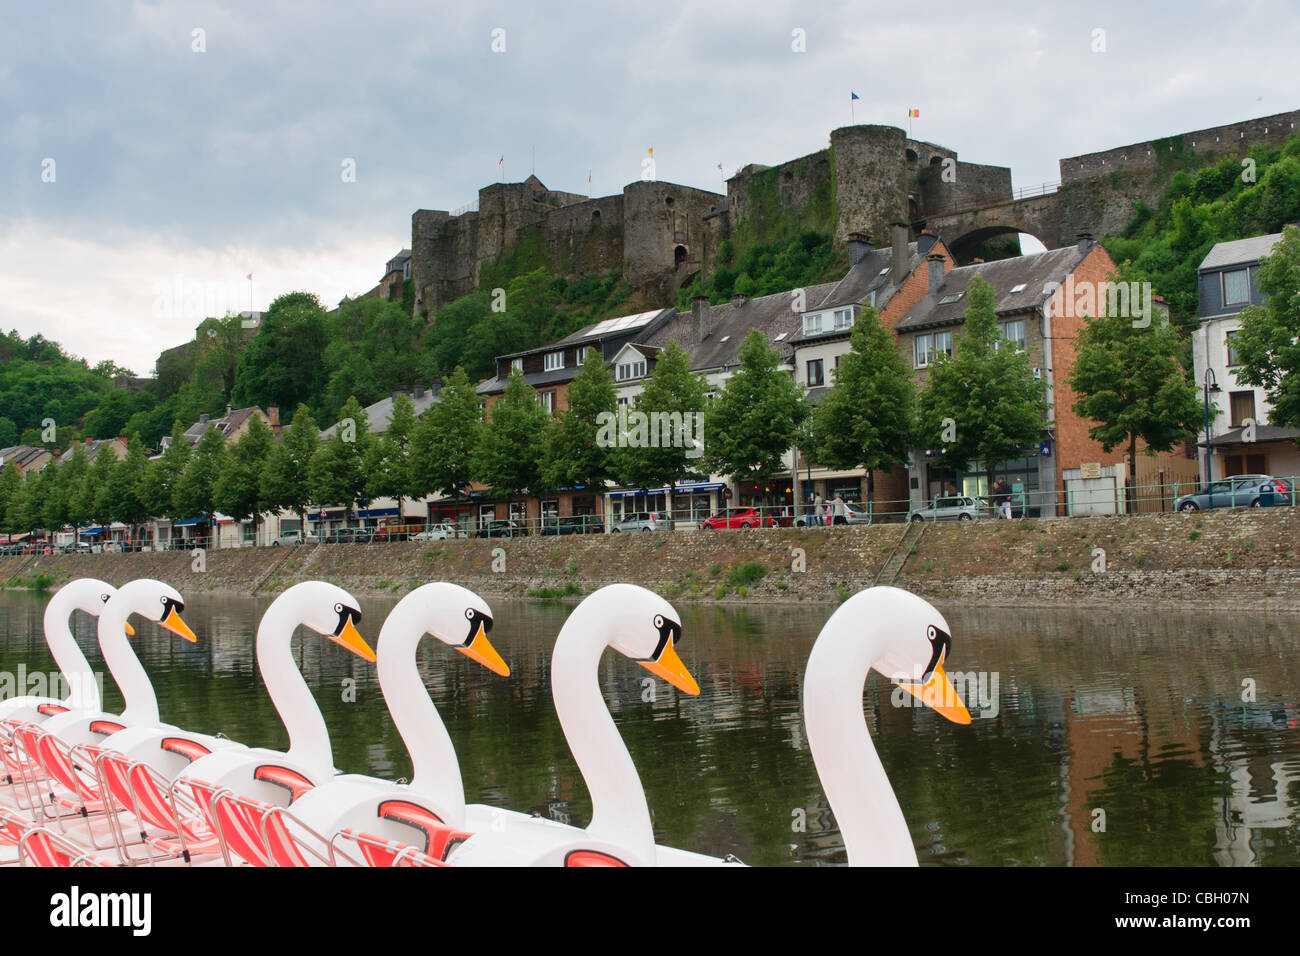 Bouillon Belgium Swan Shaped Boats On The River The Town And